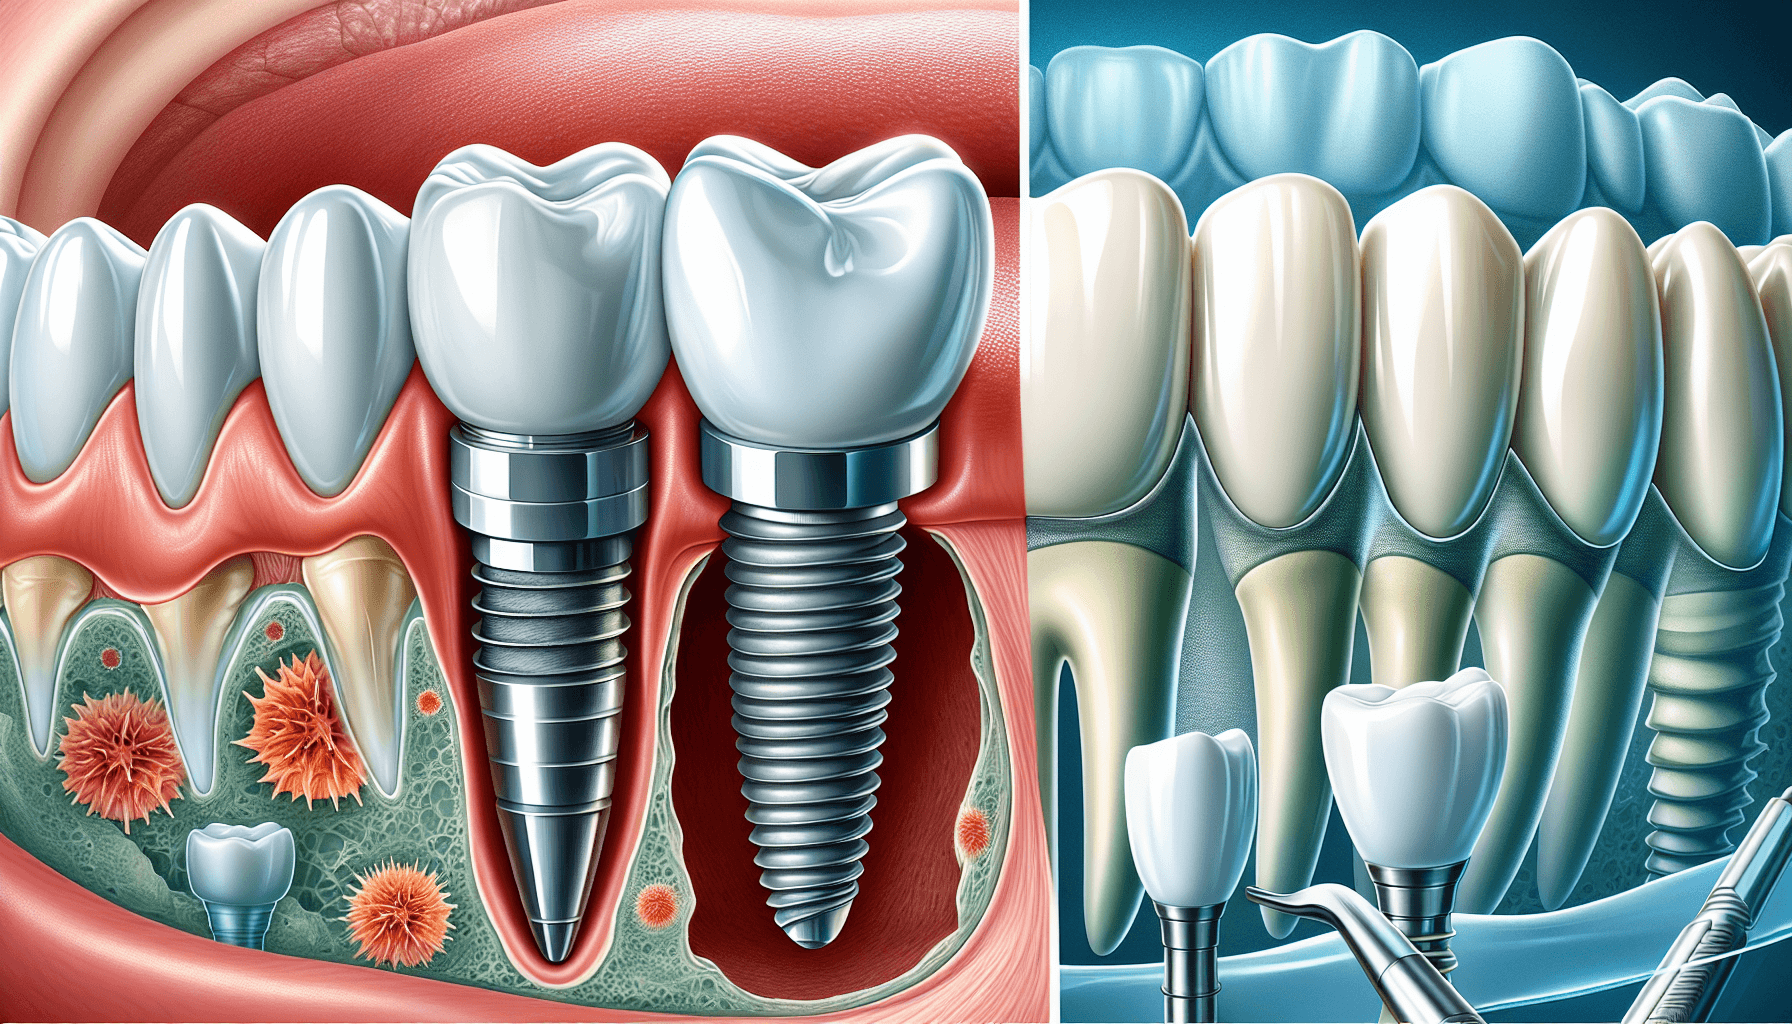 Comparison of single tooth replacement and full arch restoration